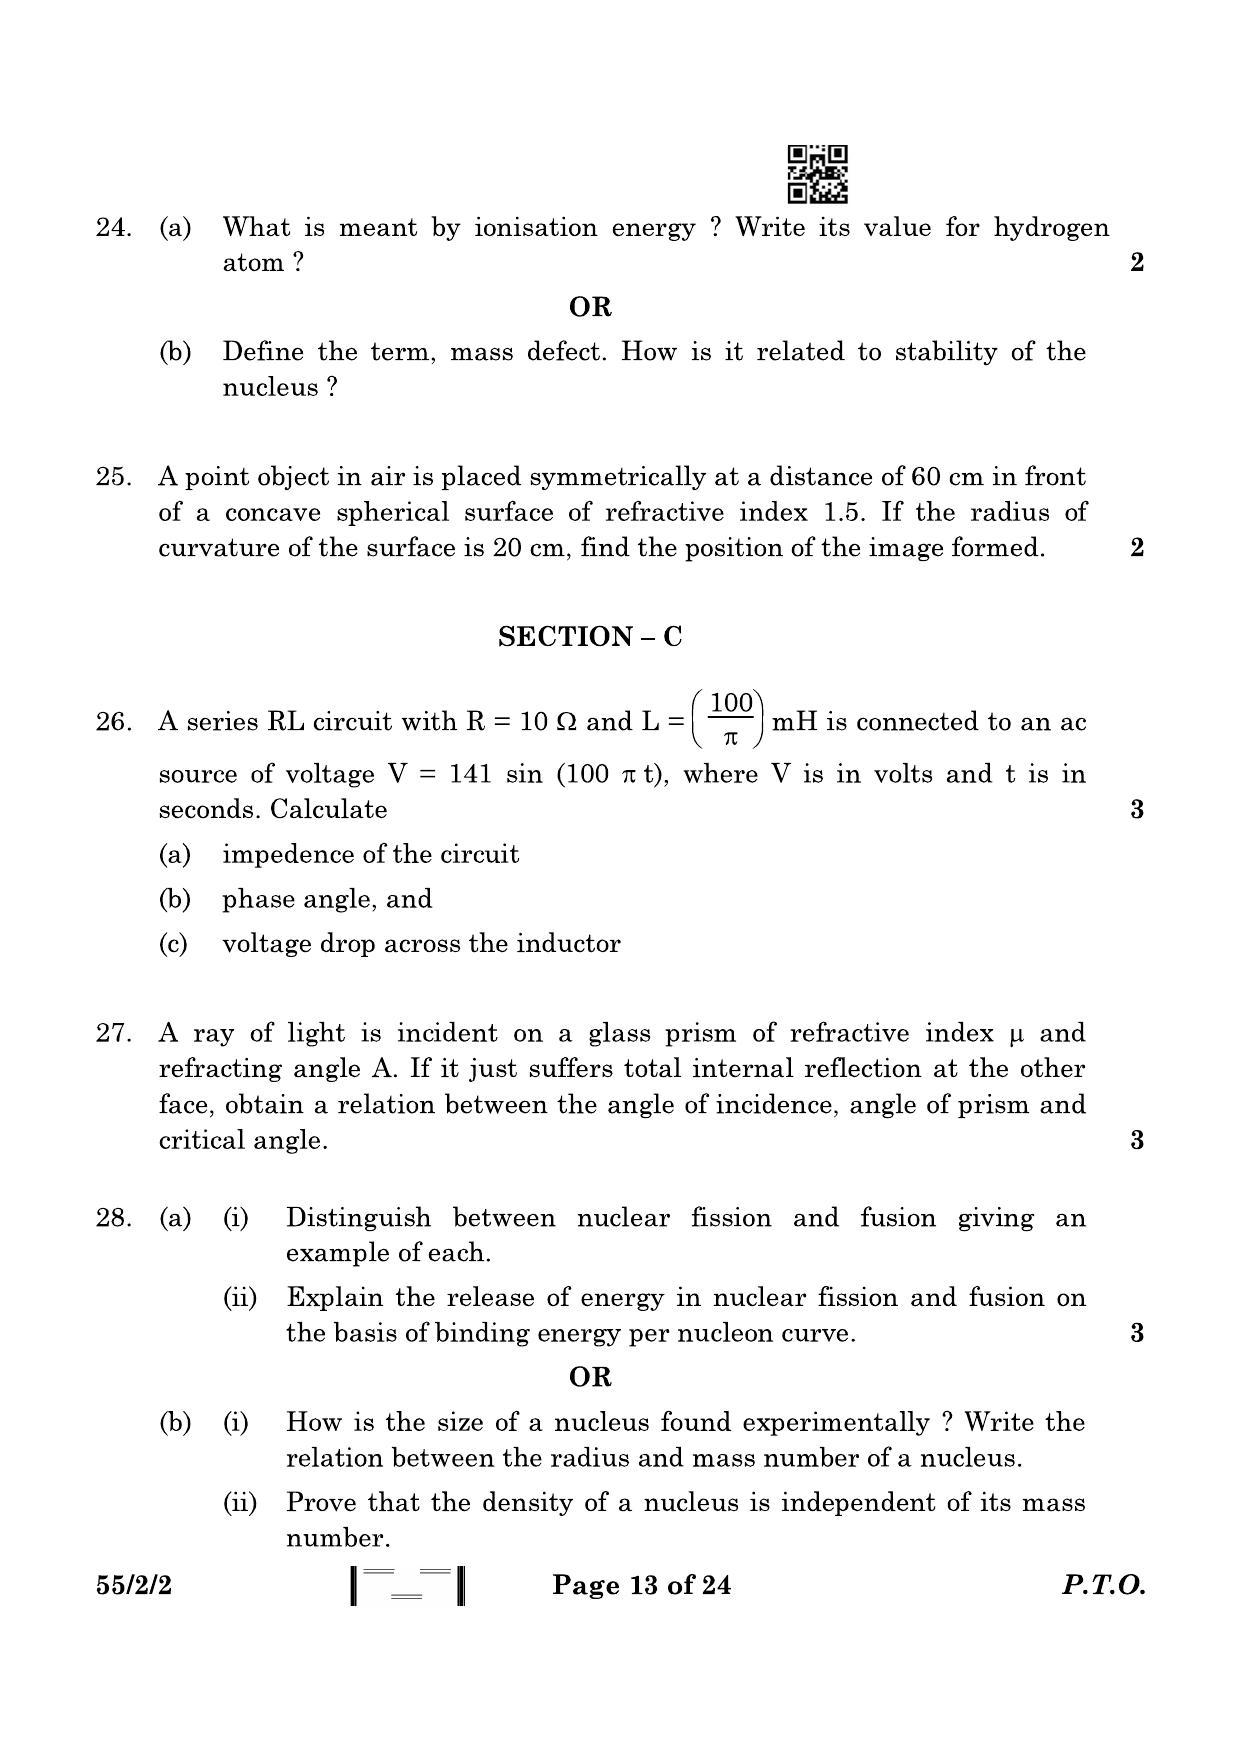 CBSE Class 12 55-2-2 Physics 2023 Question Paper - Page 13